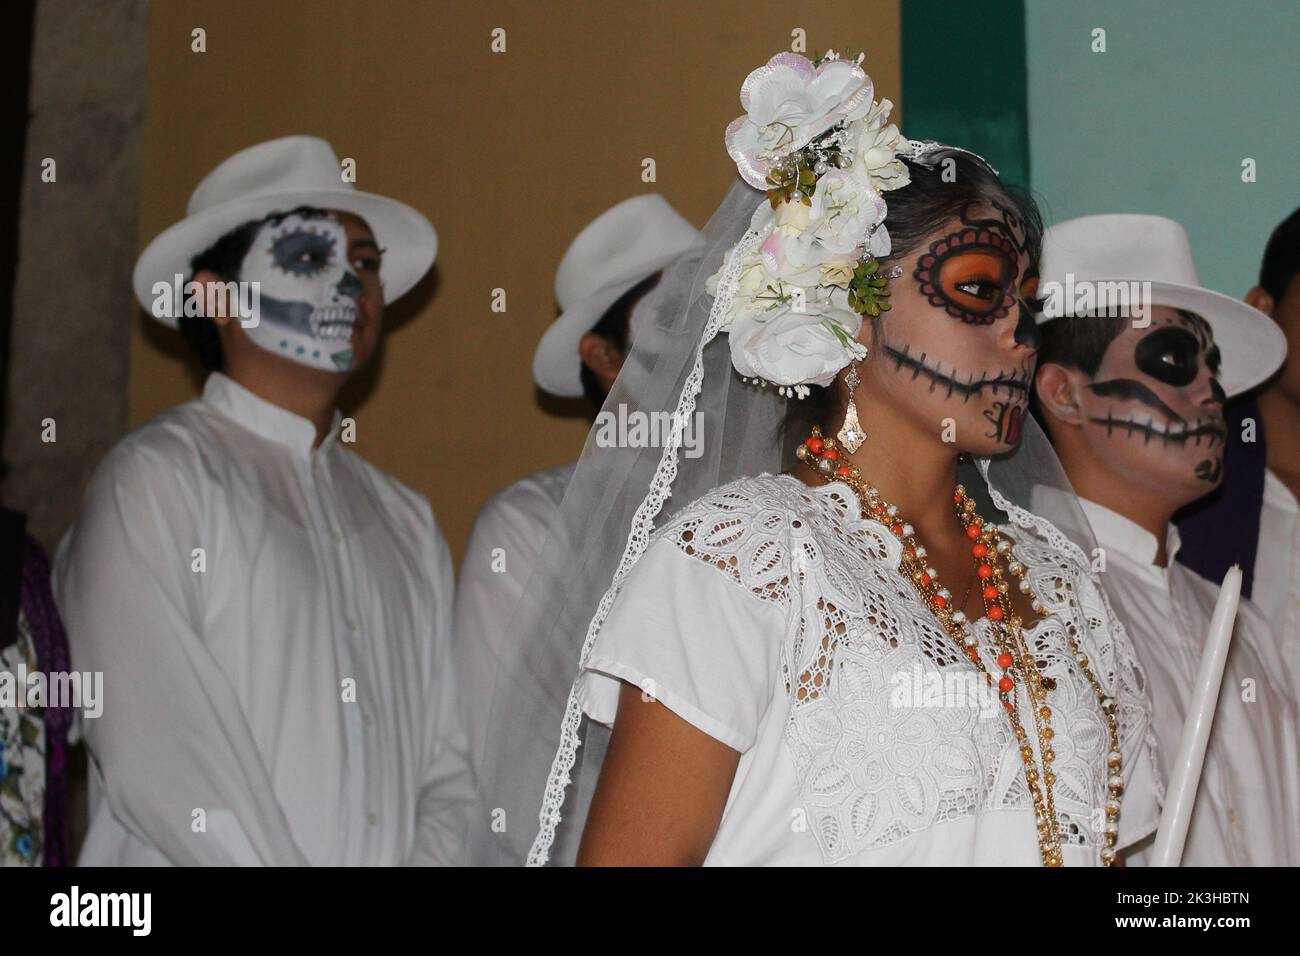 MERIDA, MEXICO - OCTOBER 28, 2016 Paseo de las Ánimas, Passage of the Souls - Day of the Dead men and women with makeup Stock Photo